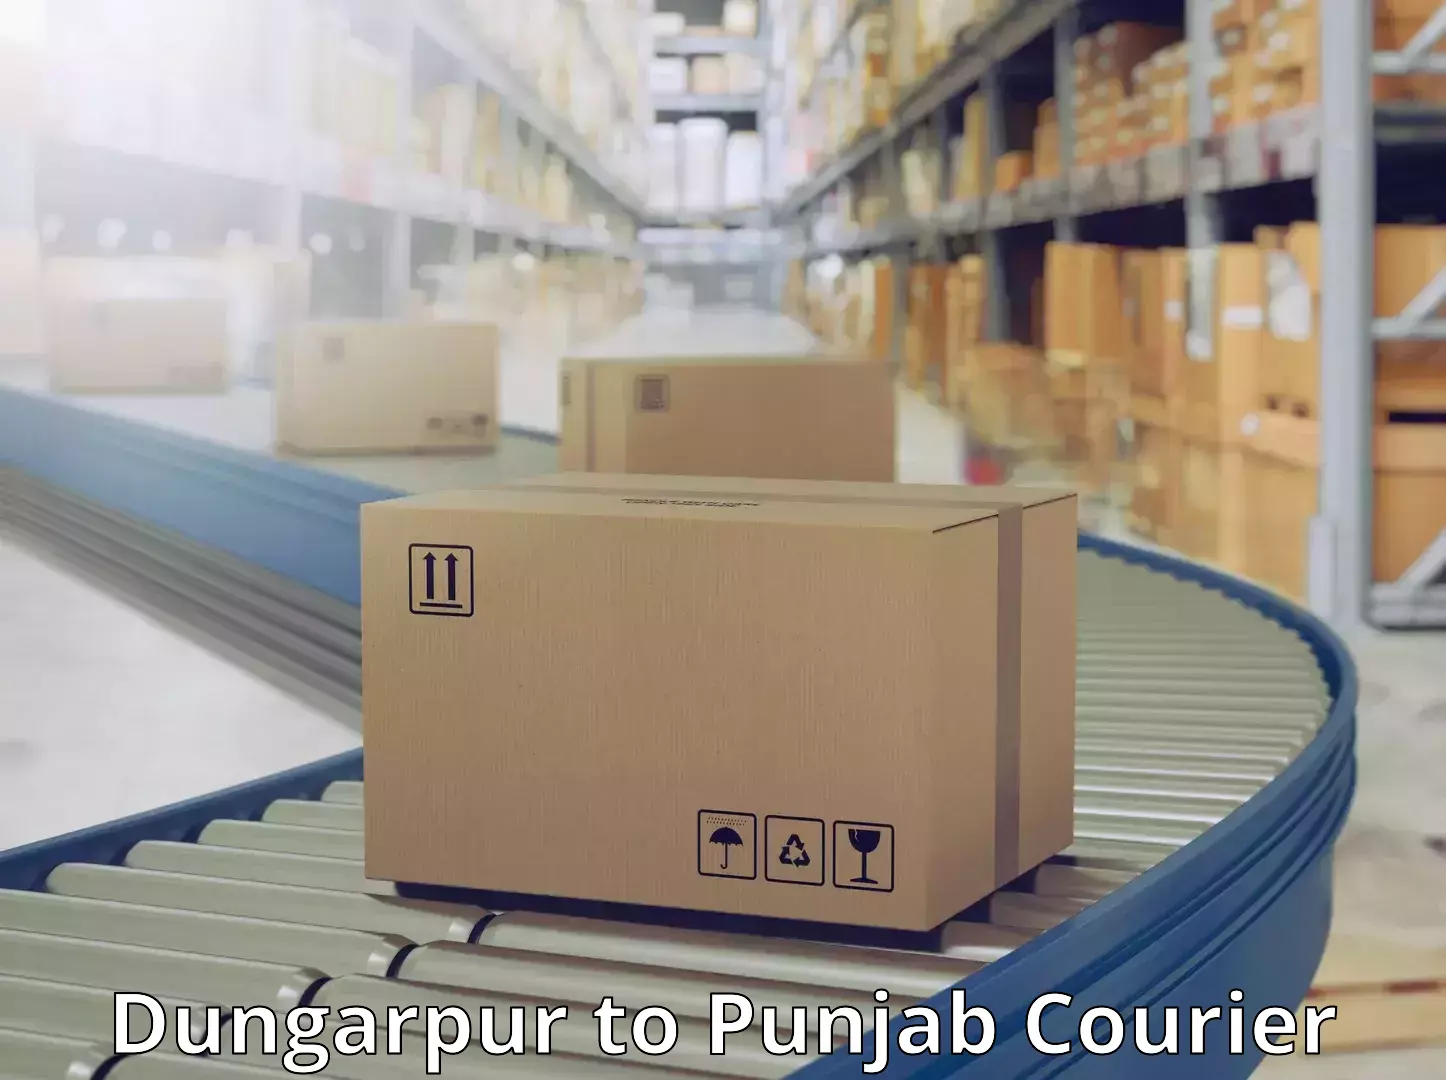 End-to-end delivery Dungarpur to Punjab